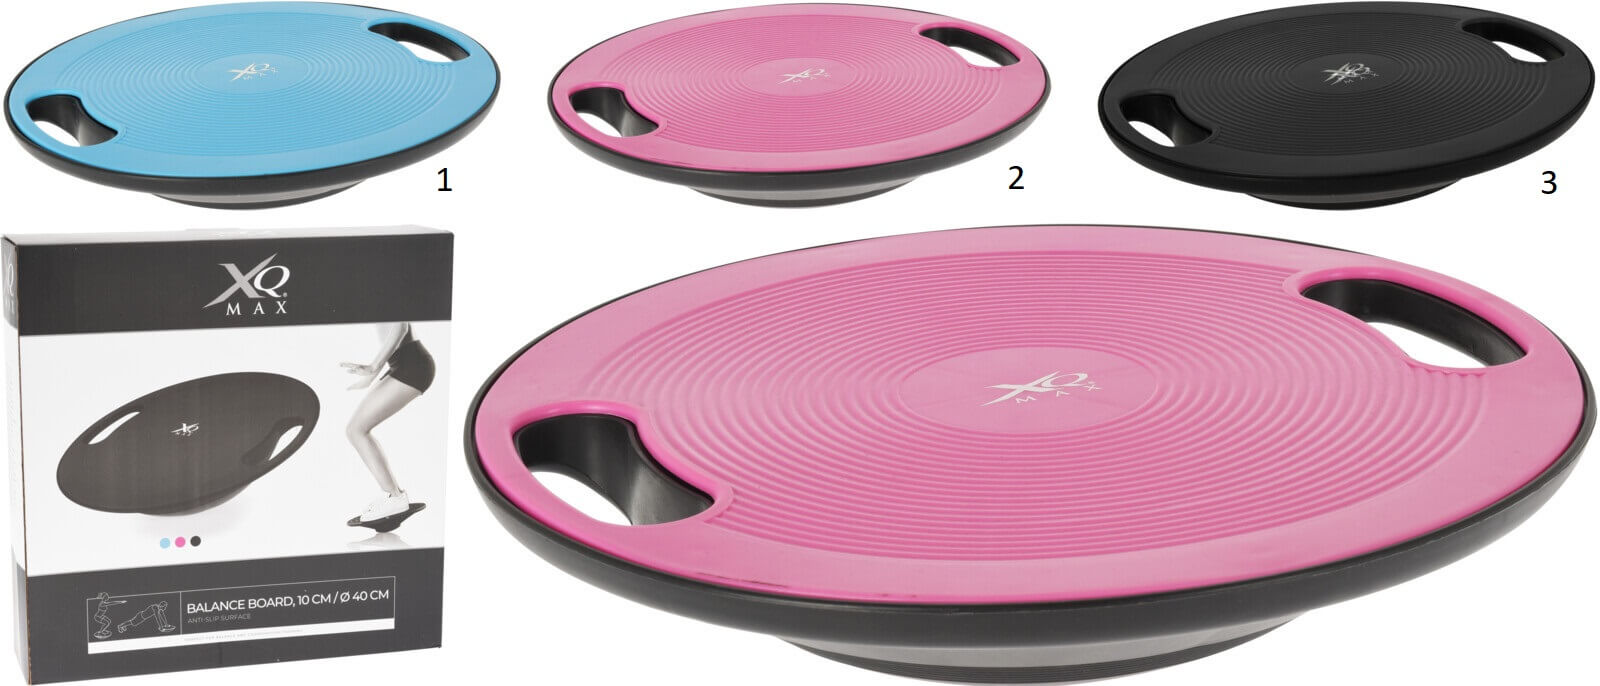 XQMAX BALANCE BOARD 1000GR 3 ASSORTED COLOURS